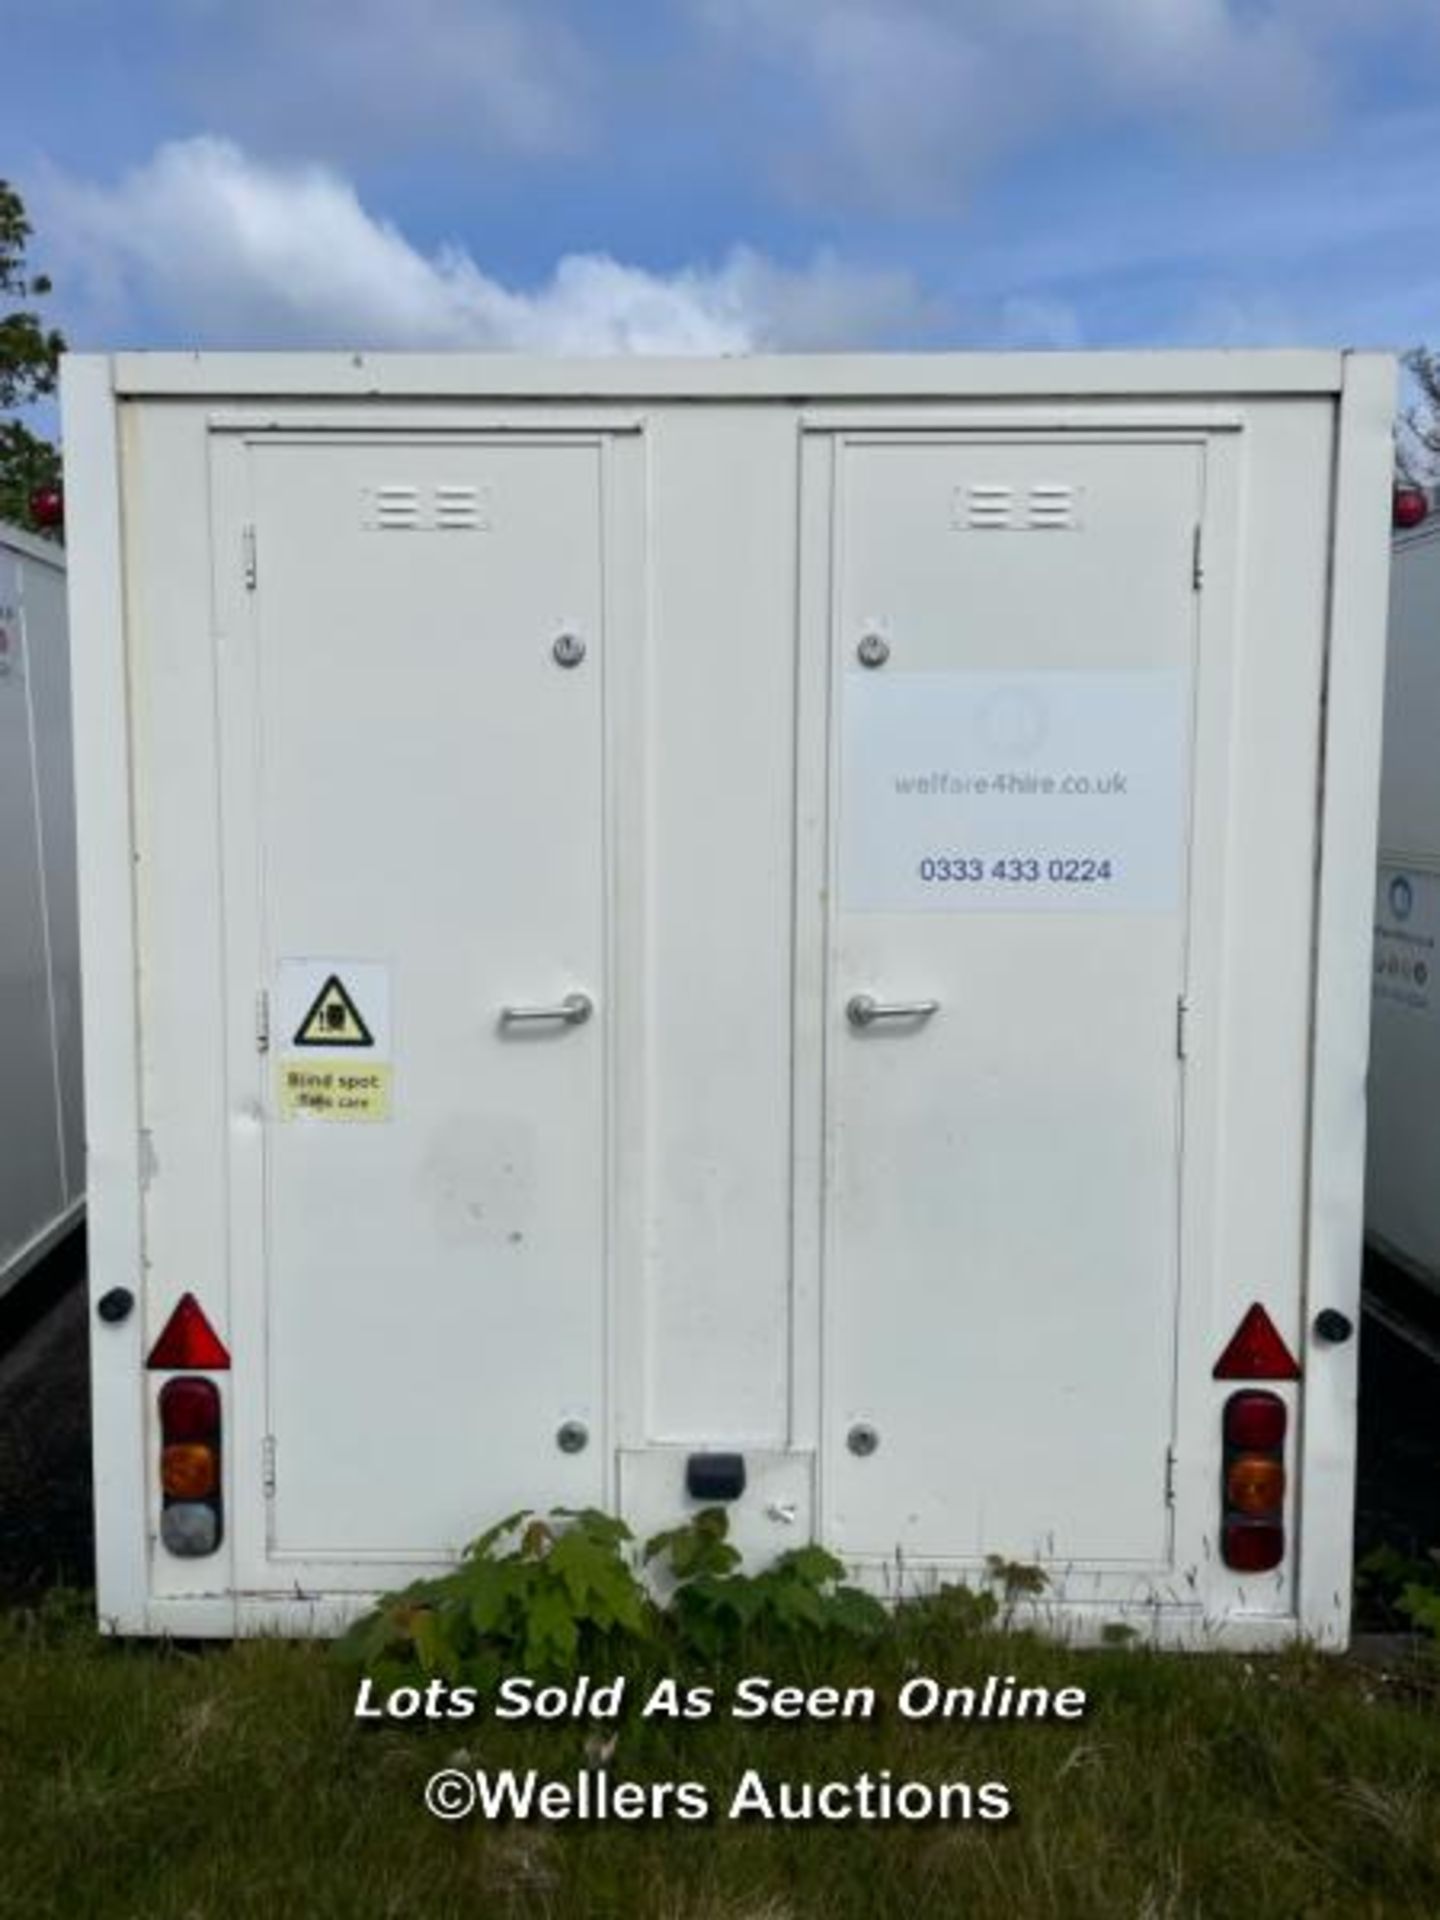 6 PERSON 12 X 7.5FT AJC EASY CABIN TOWABLE WELFARE UNIT, INCLUDES WASH BASIN, KETTLE, MICROWAVE, - Image 5 of 18